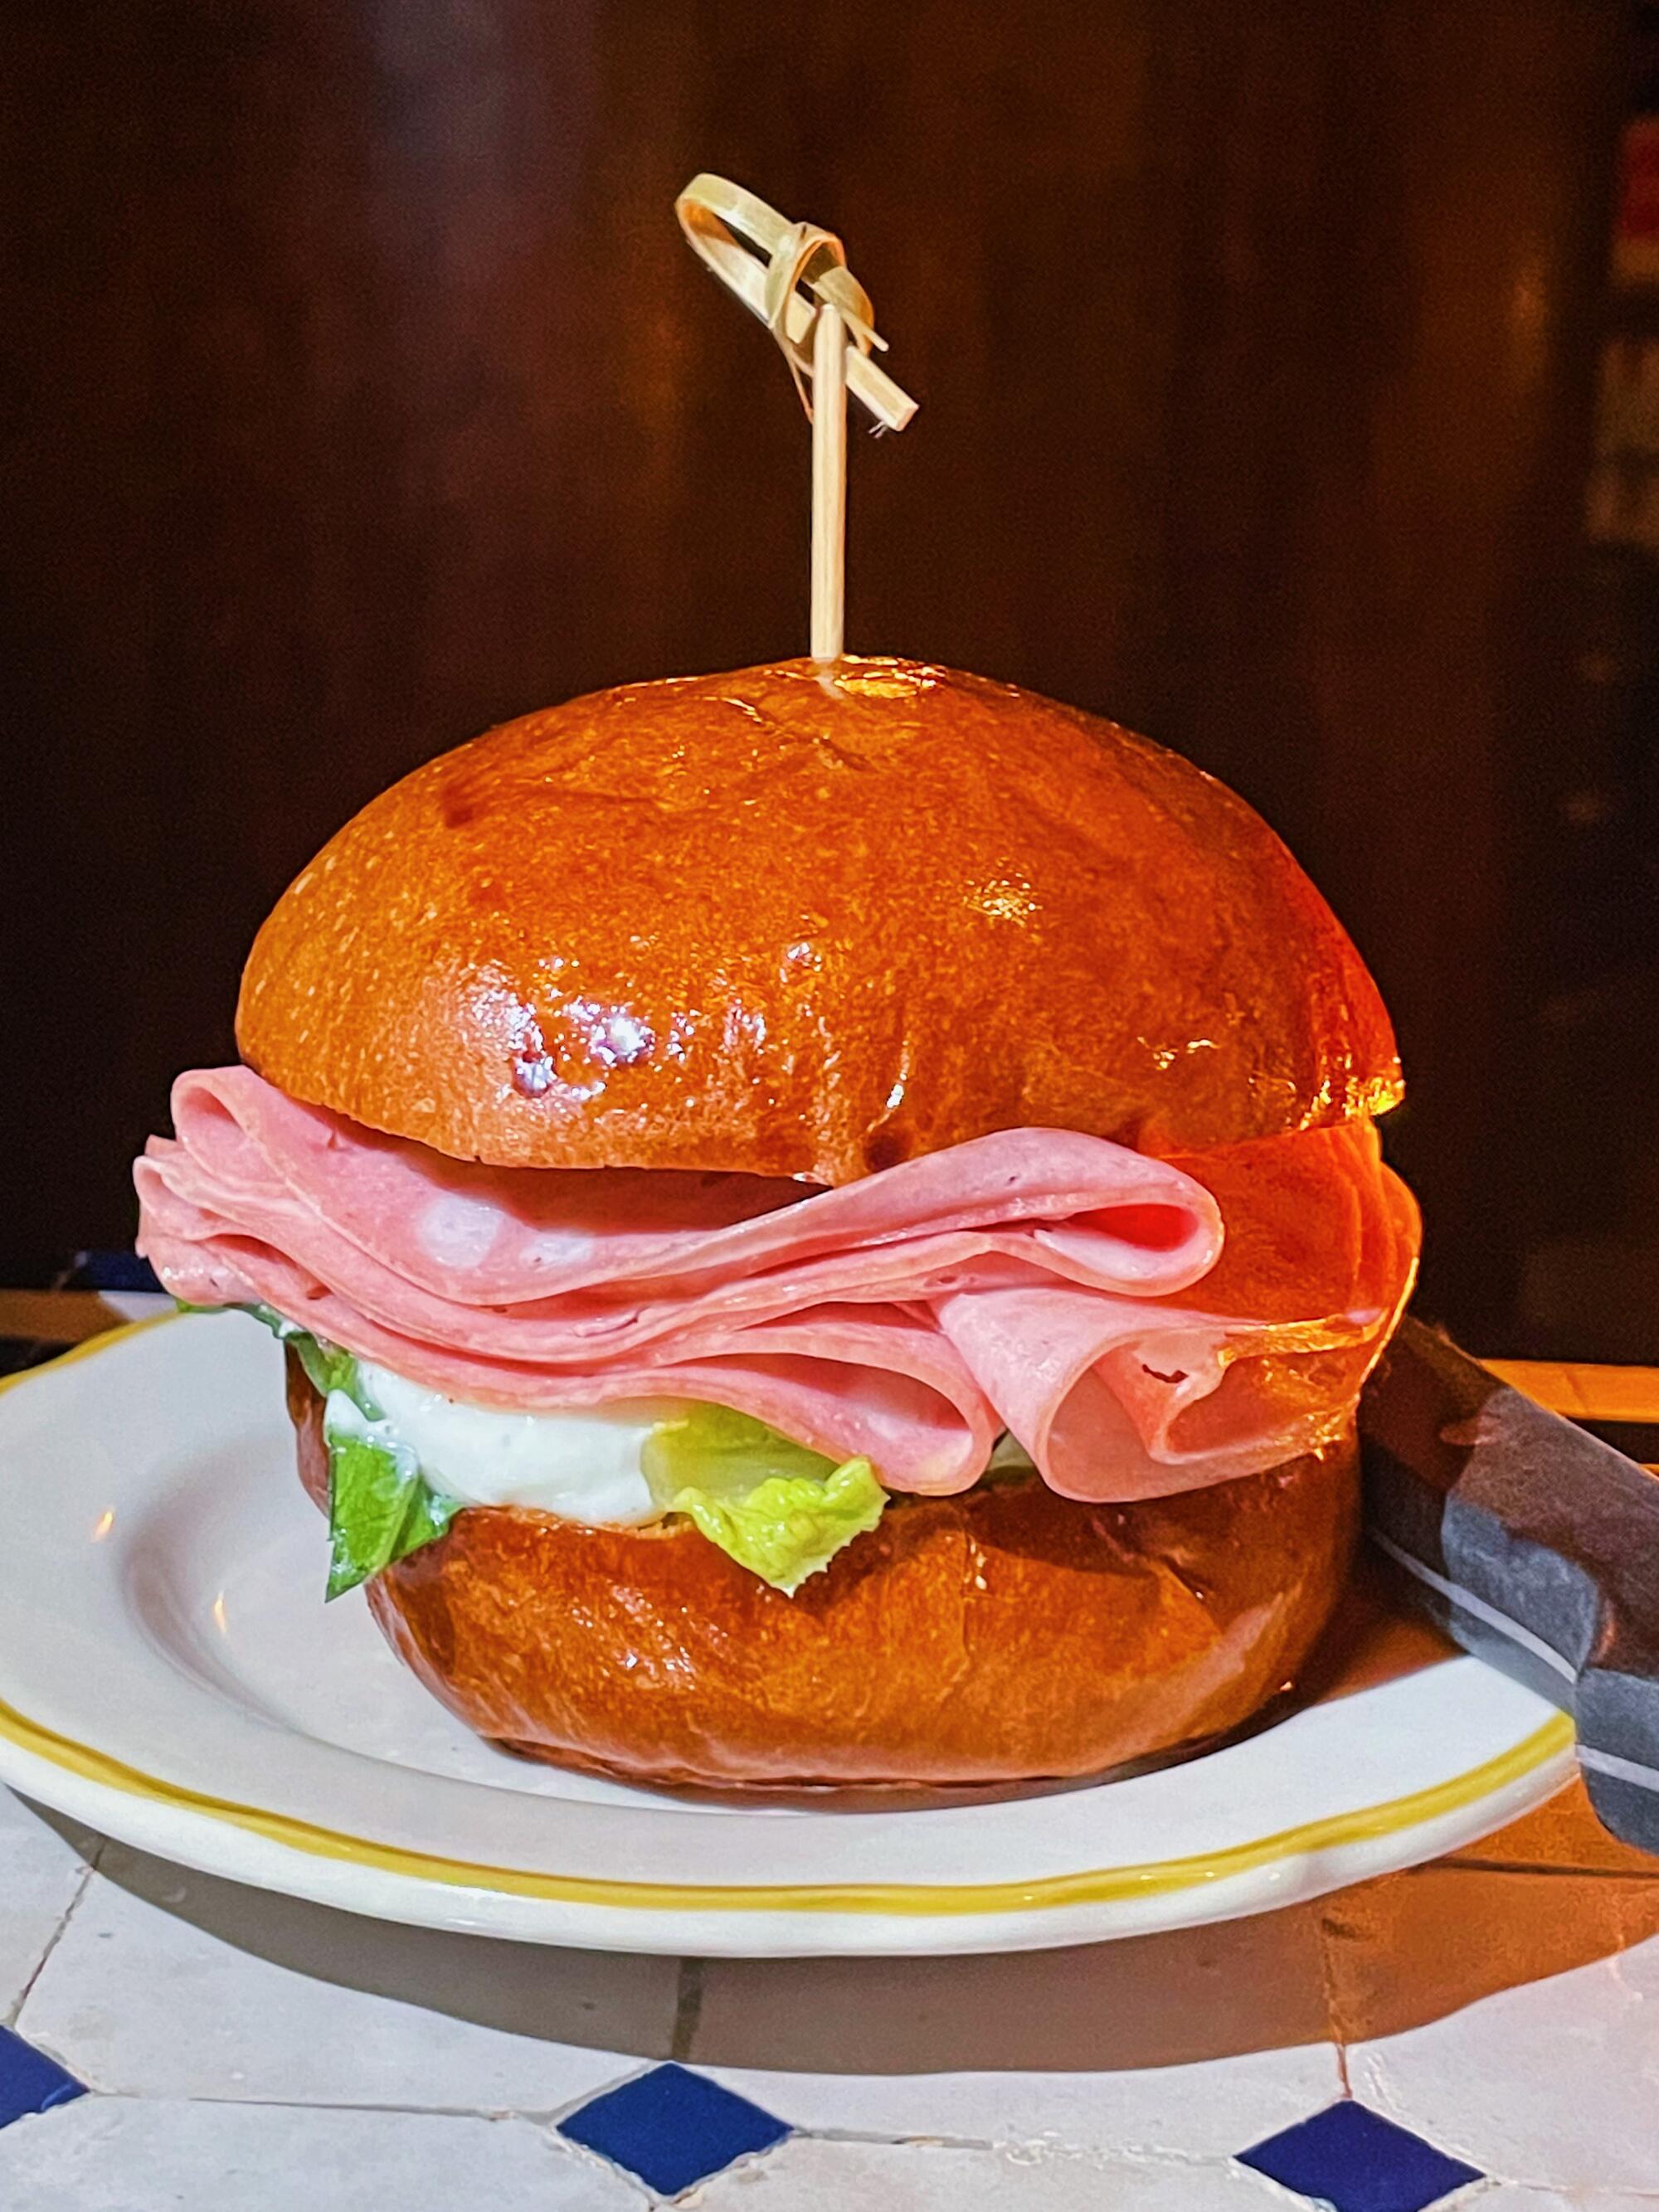 A glossy-bunned mortadella sandwich atop a blue-and-white tile table.